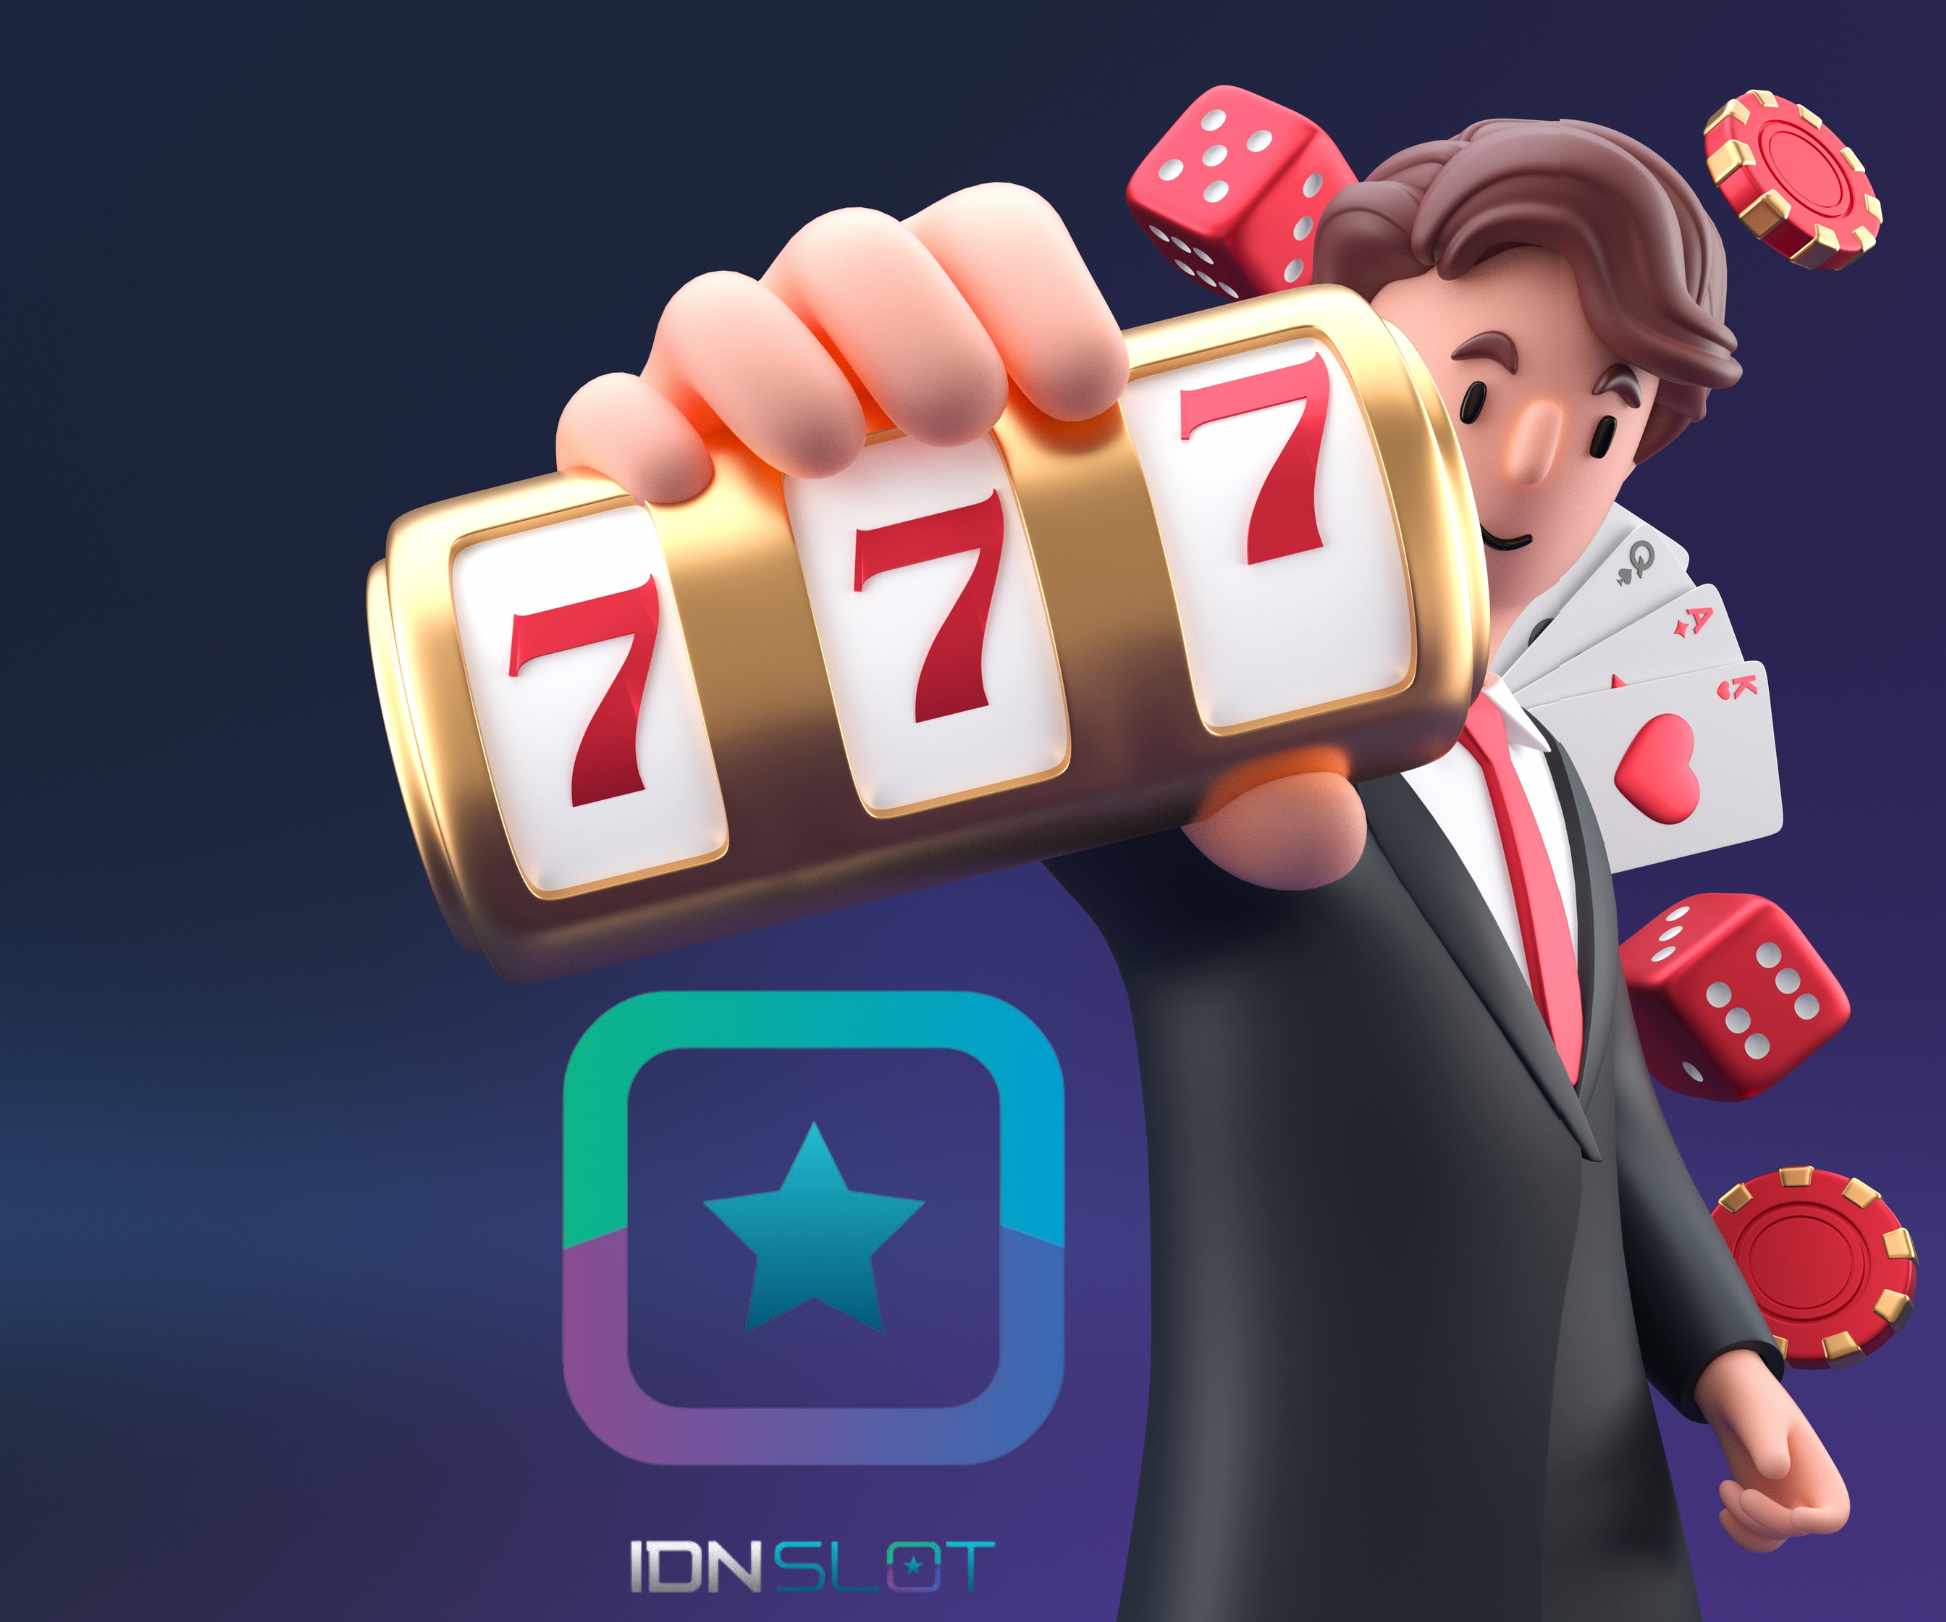 Idn slot the newest slot game from IDN Play Indonesia